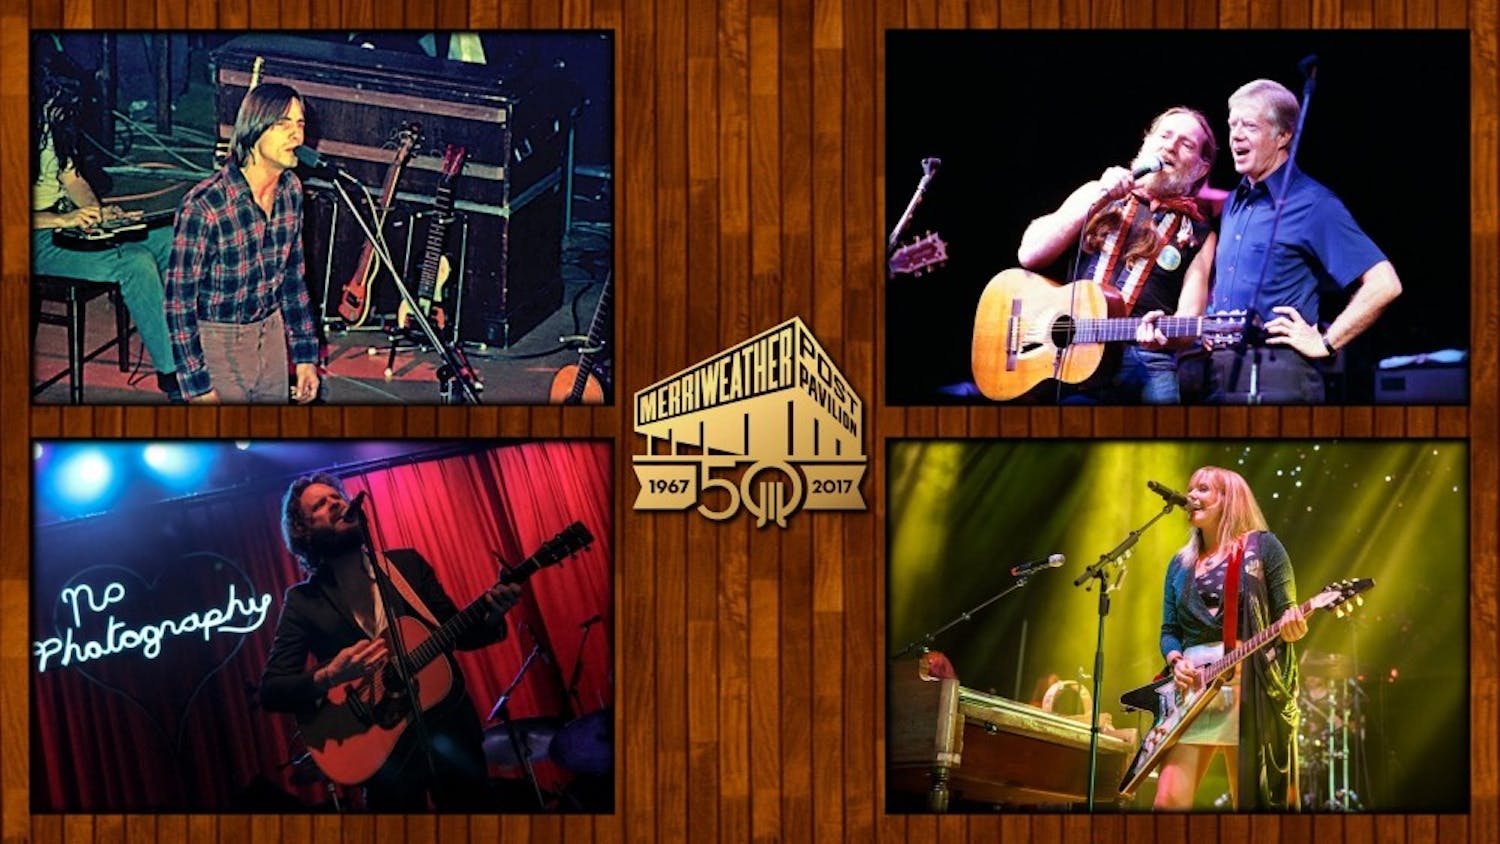 Pictured: Jackson Browne recording “Running On Empty” at Merriweather in 1977, Willie Nelson with President Jimmy Carter on stage at Merriweather in 1980, Father John Misty opening for The Decemberists at Merriweather in 2015, and Grace Potter performing at the Merryland Festival at Merriweather in 2016. Photos courtesy of Merriweather Post Pavilion, Dave Barnhouser 13th Hour Photography and Richie Downs. Grace Potter’s Photo by Richie Downs, and Father John Misty’s Photo by Dave Barnhouser 13th Hour Photography.